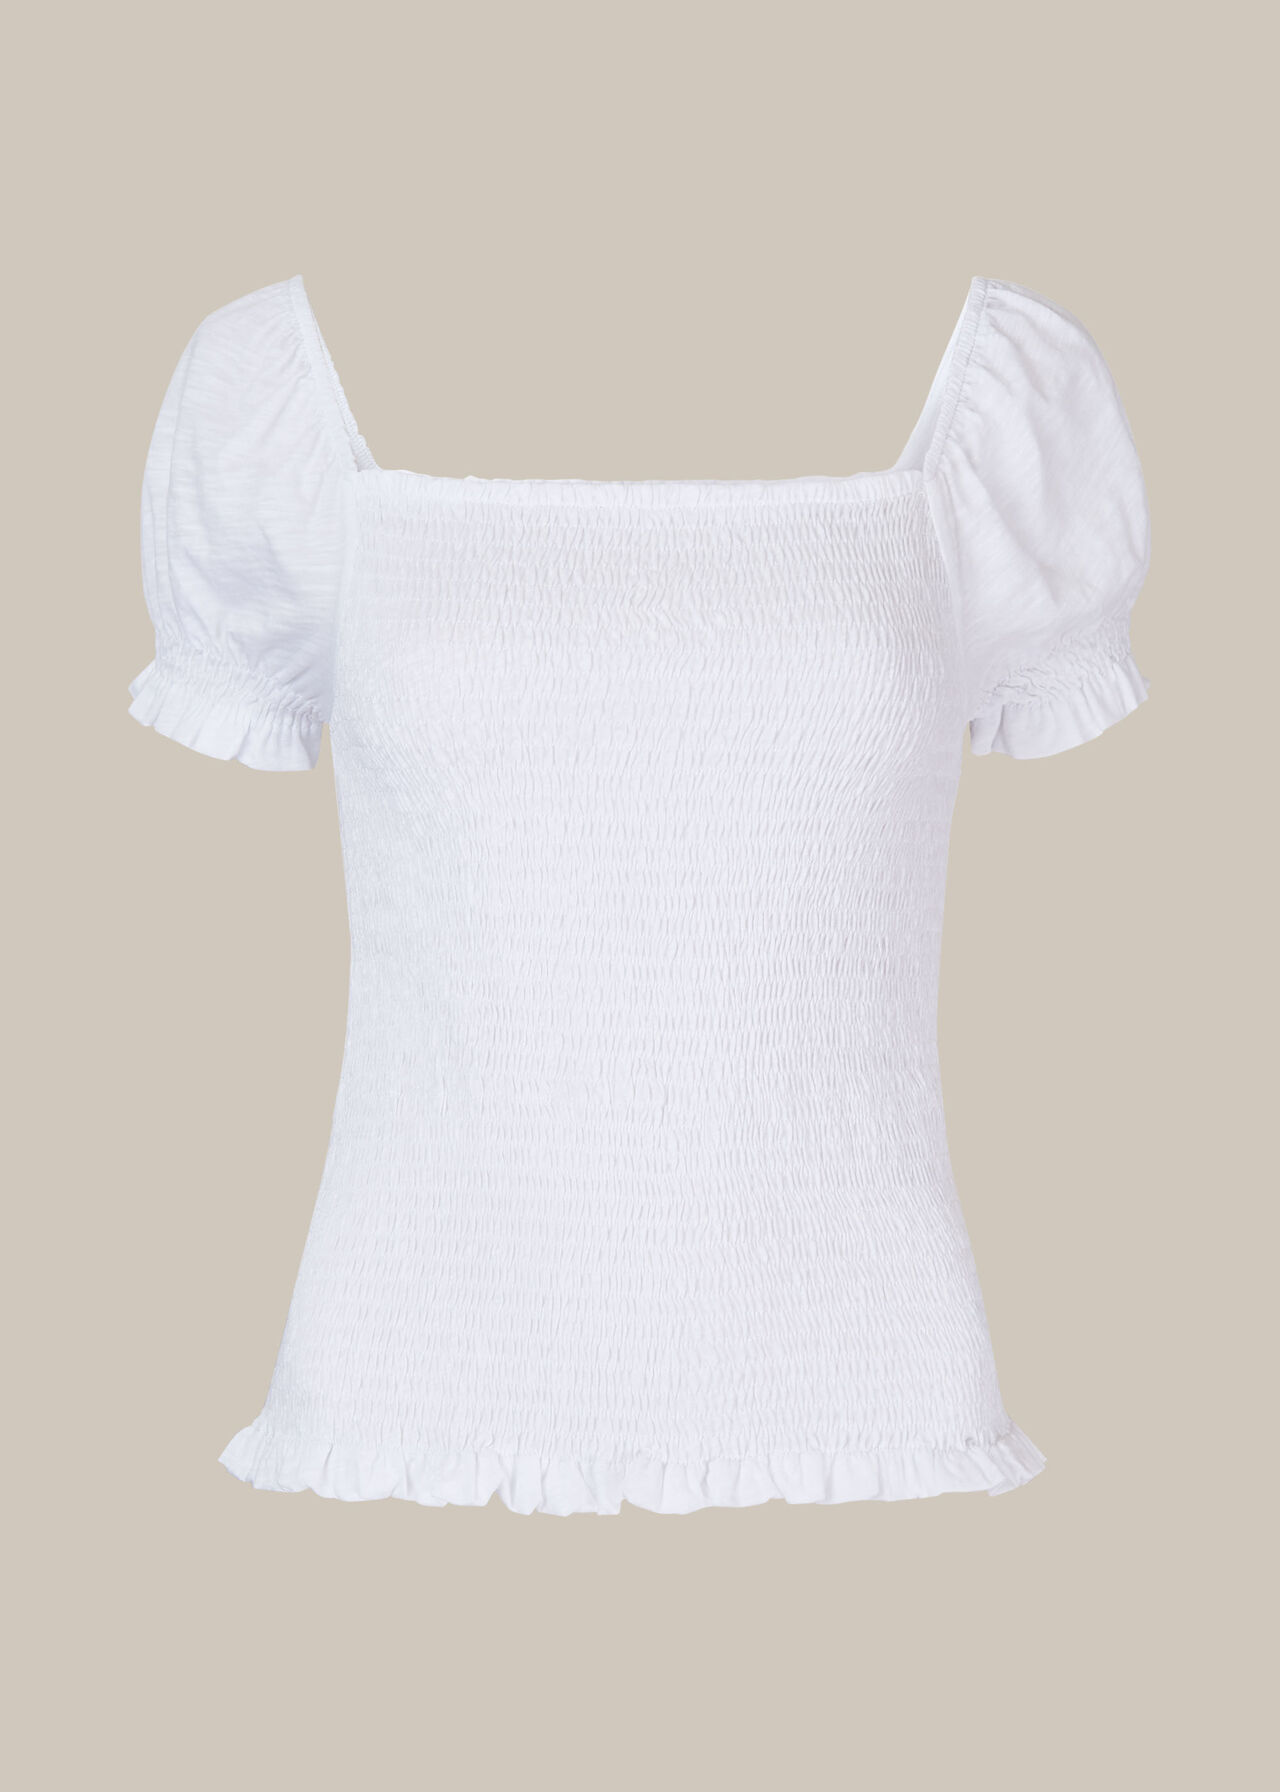 Bex Rouched Frill Top White